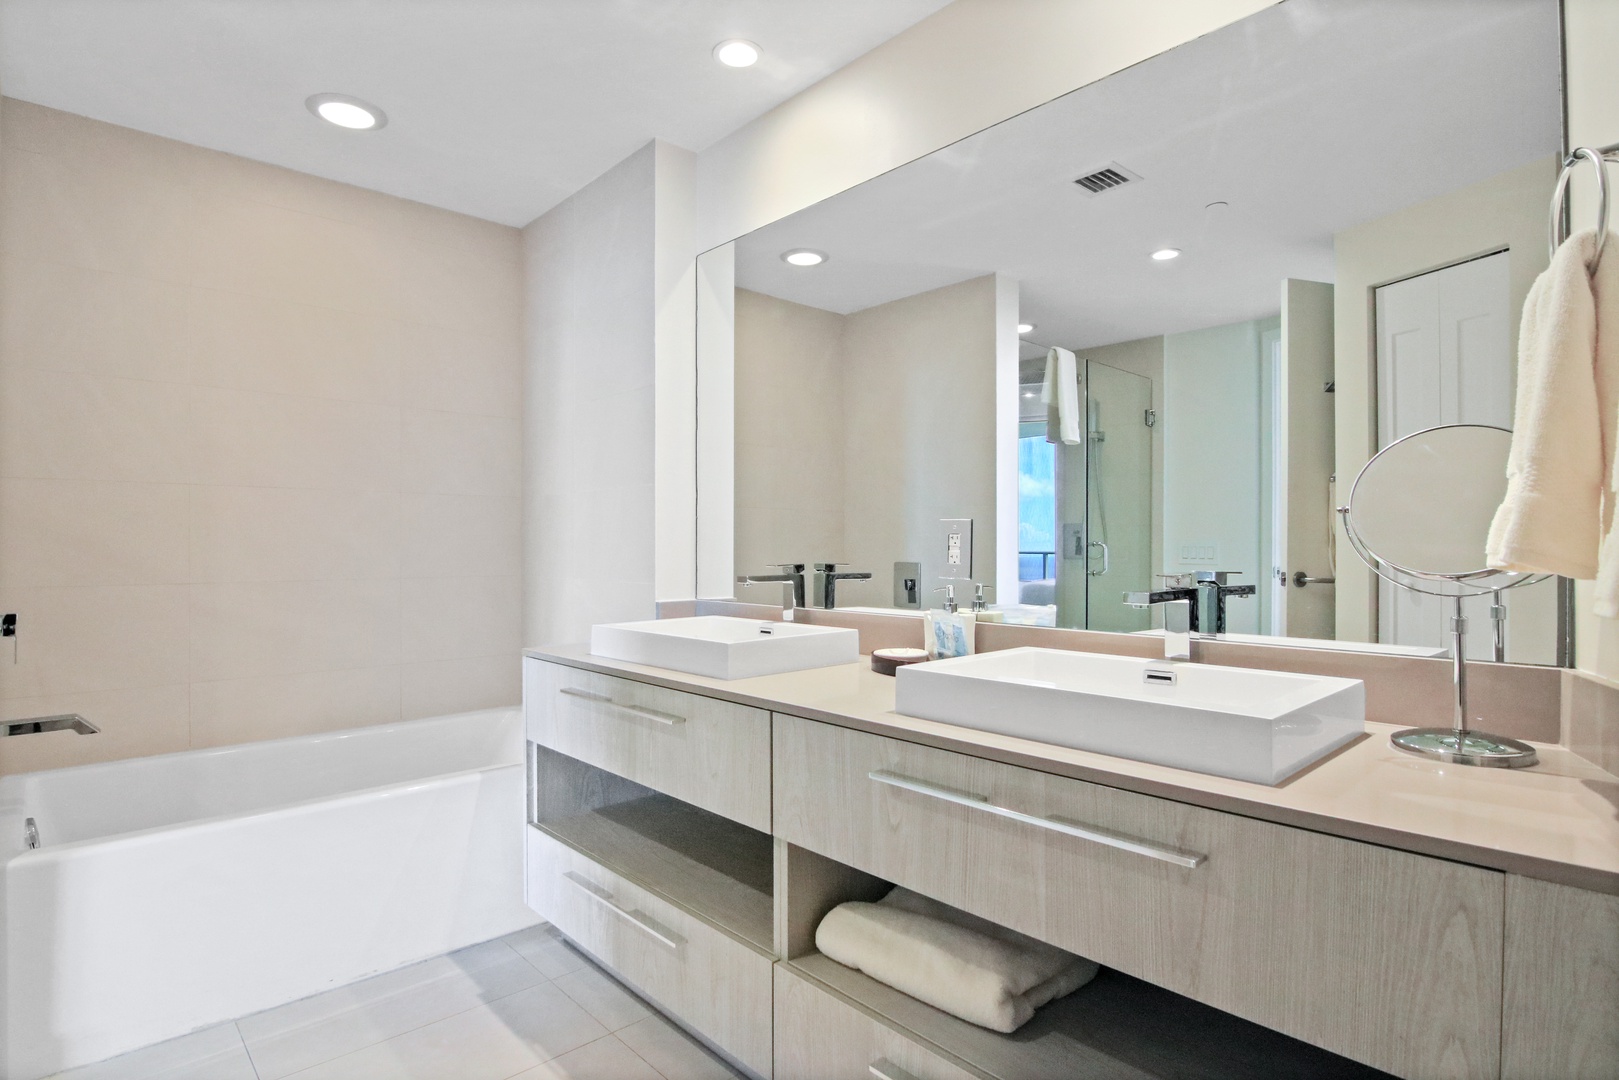 The second king en suite offers a double vanity, glass shower, & soaking tub